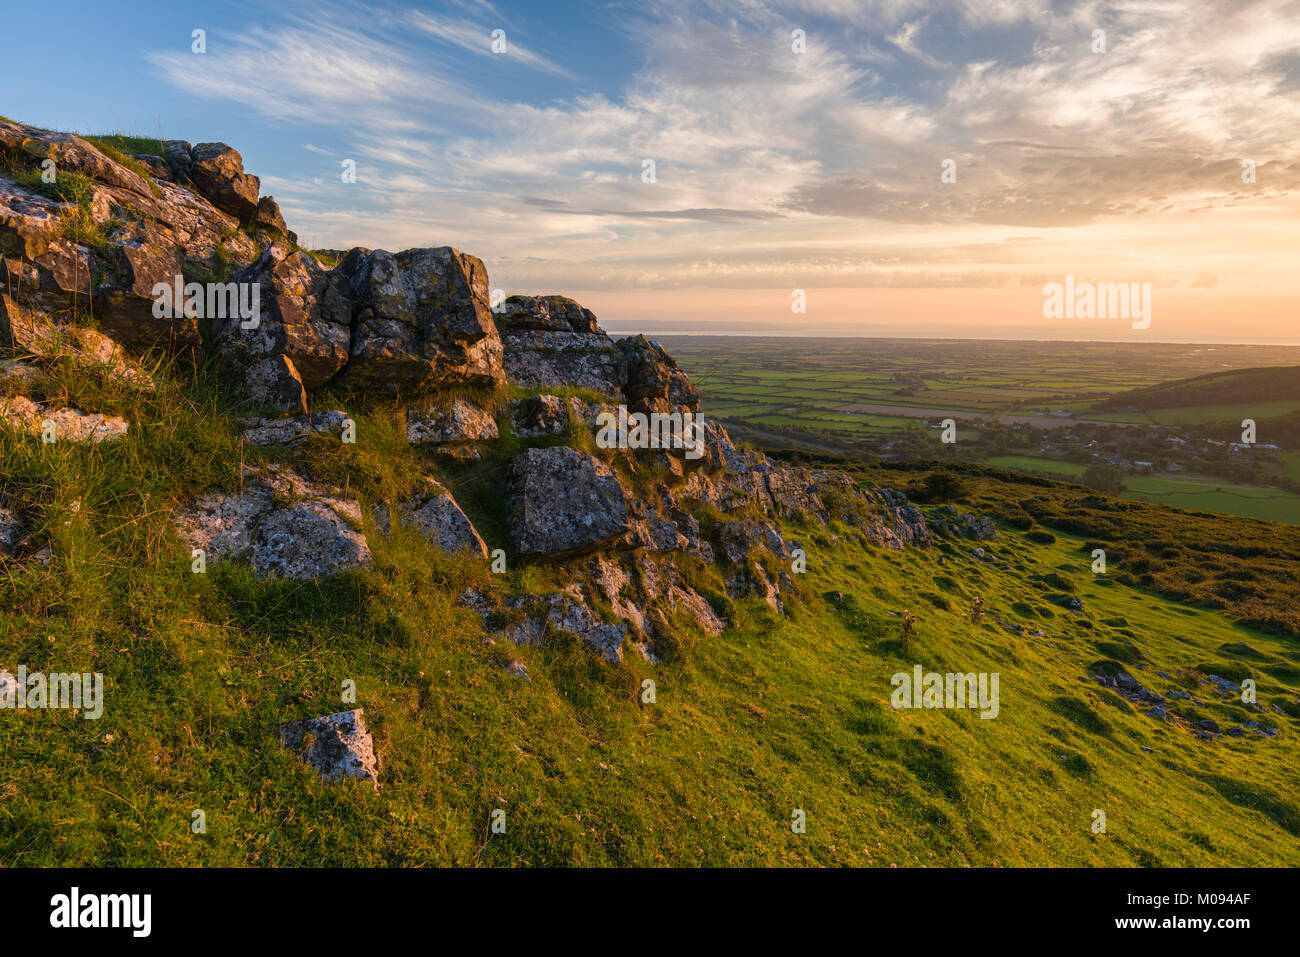 The Limestone outcrop at Crook Peak in the Mendip Hills, Somerset, England. Stock Photo